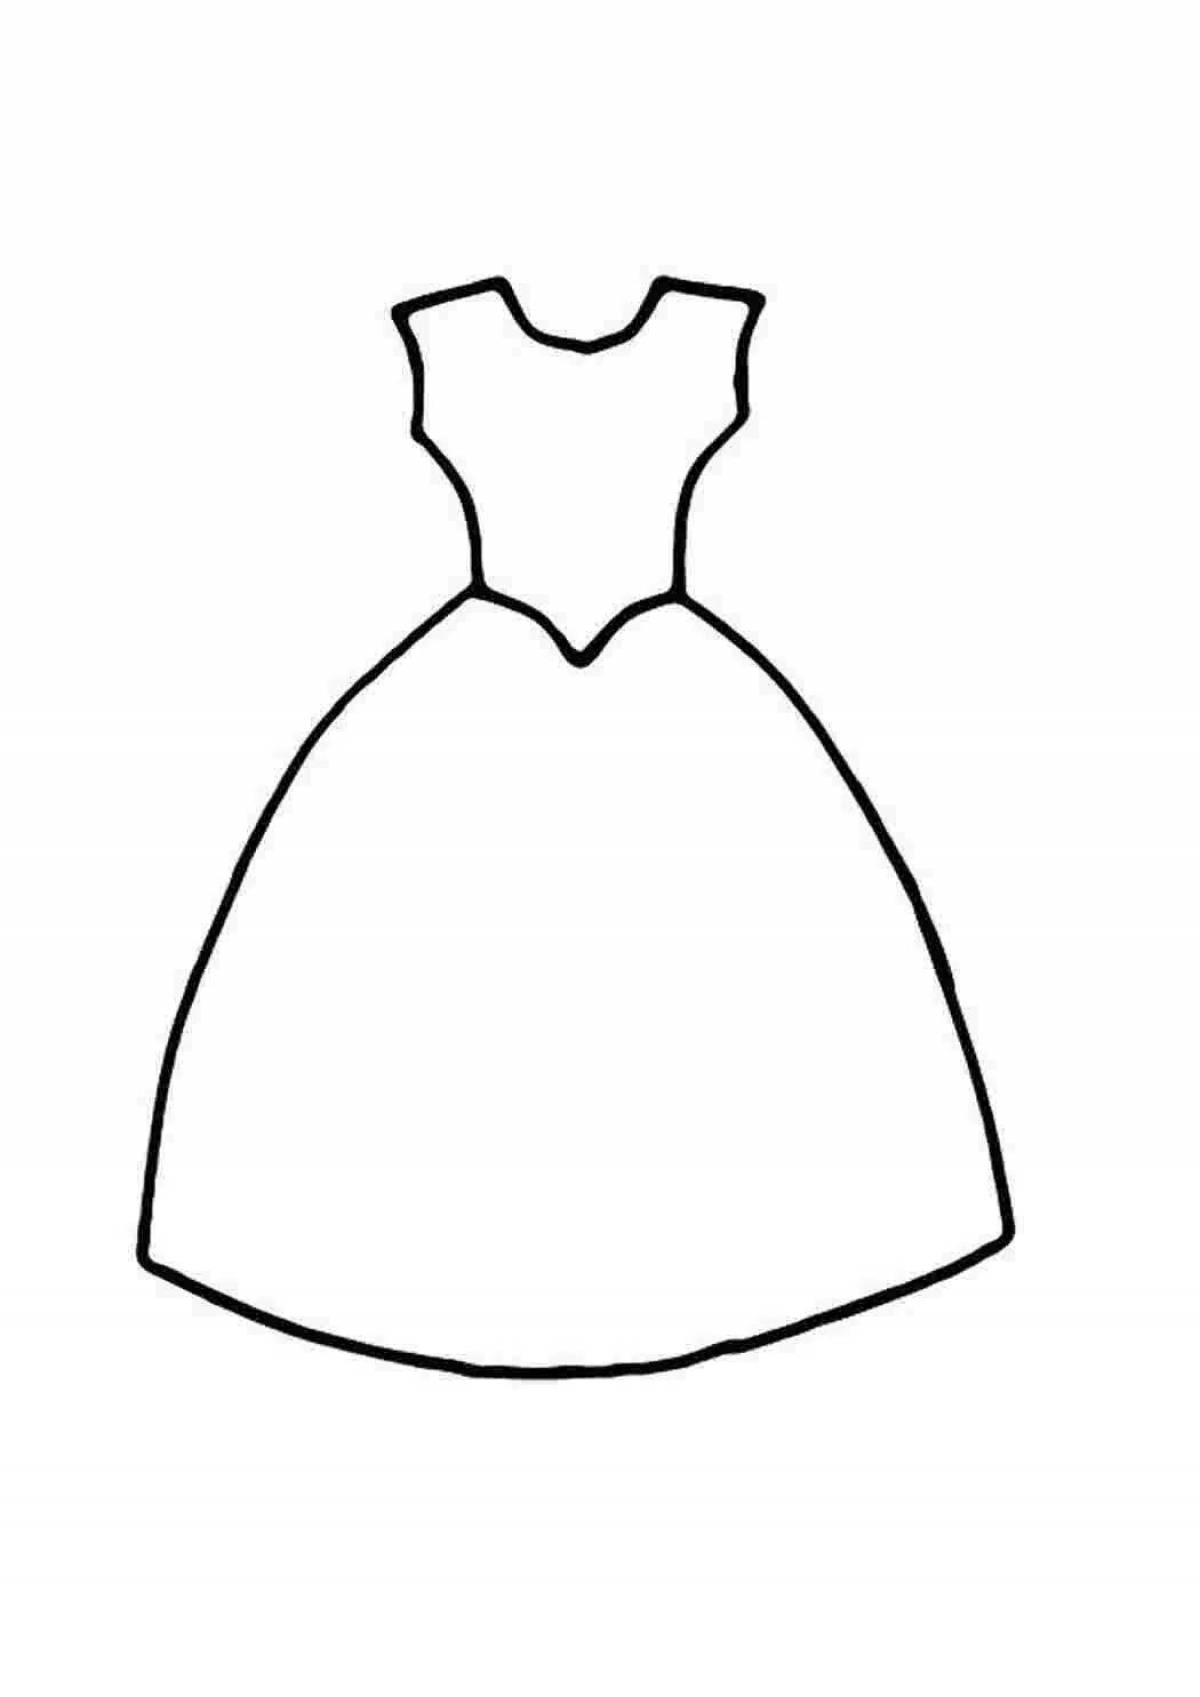 Coloring page joyful dress for dolls